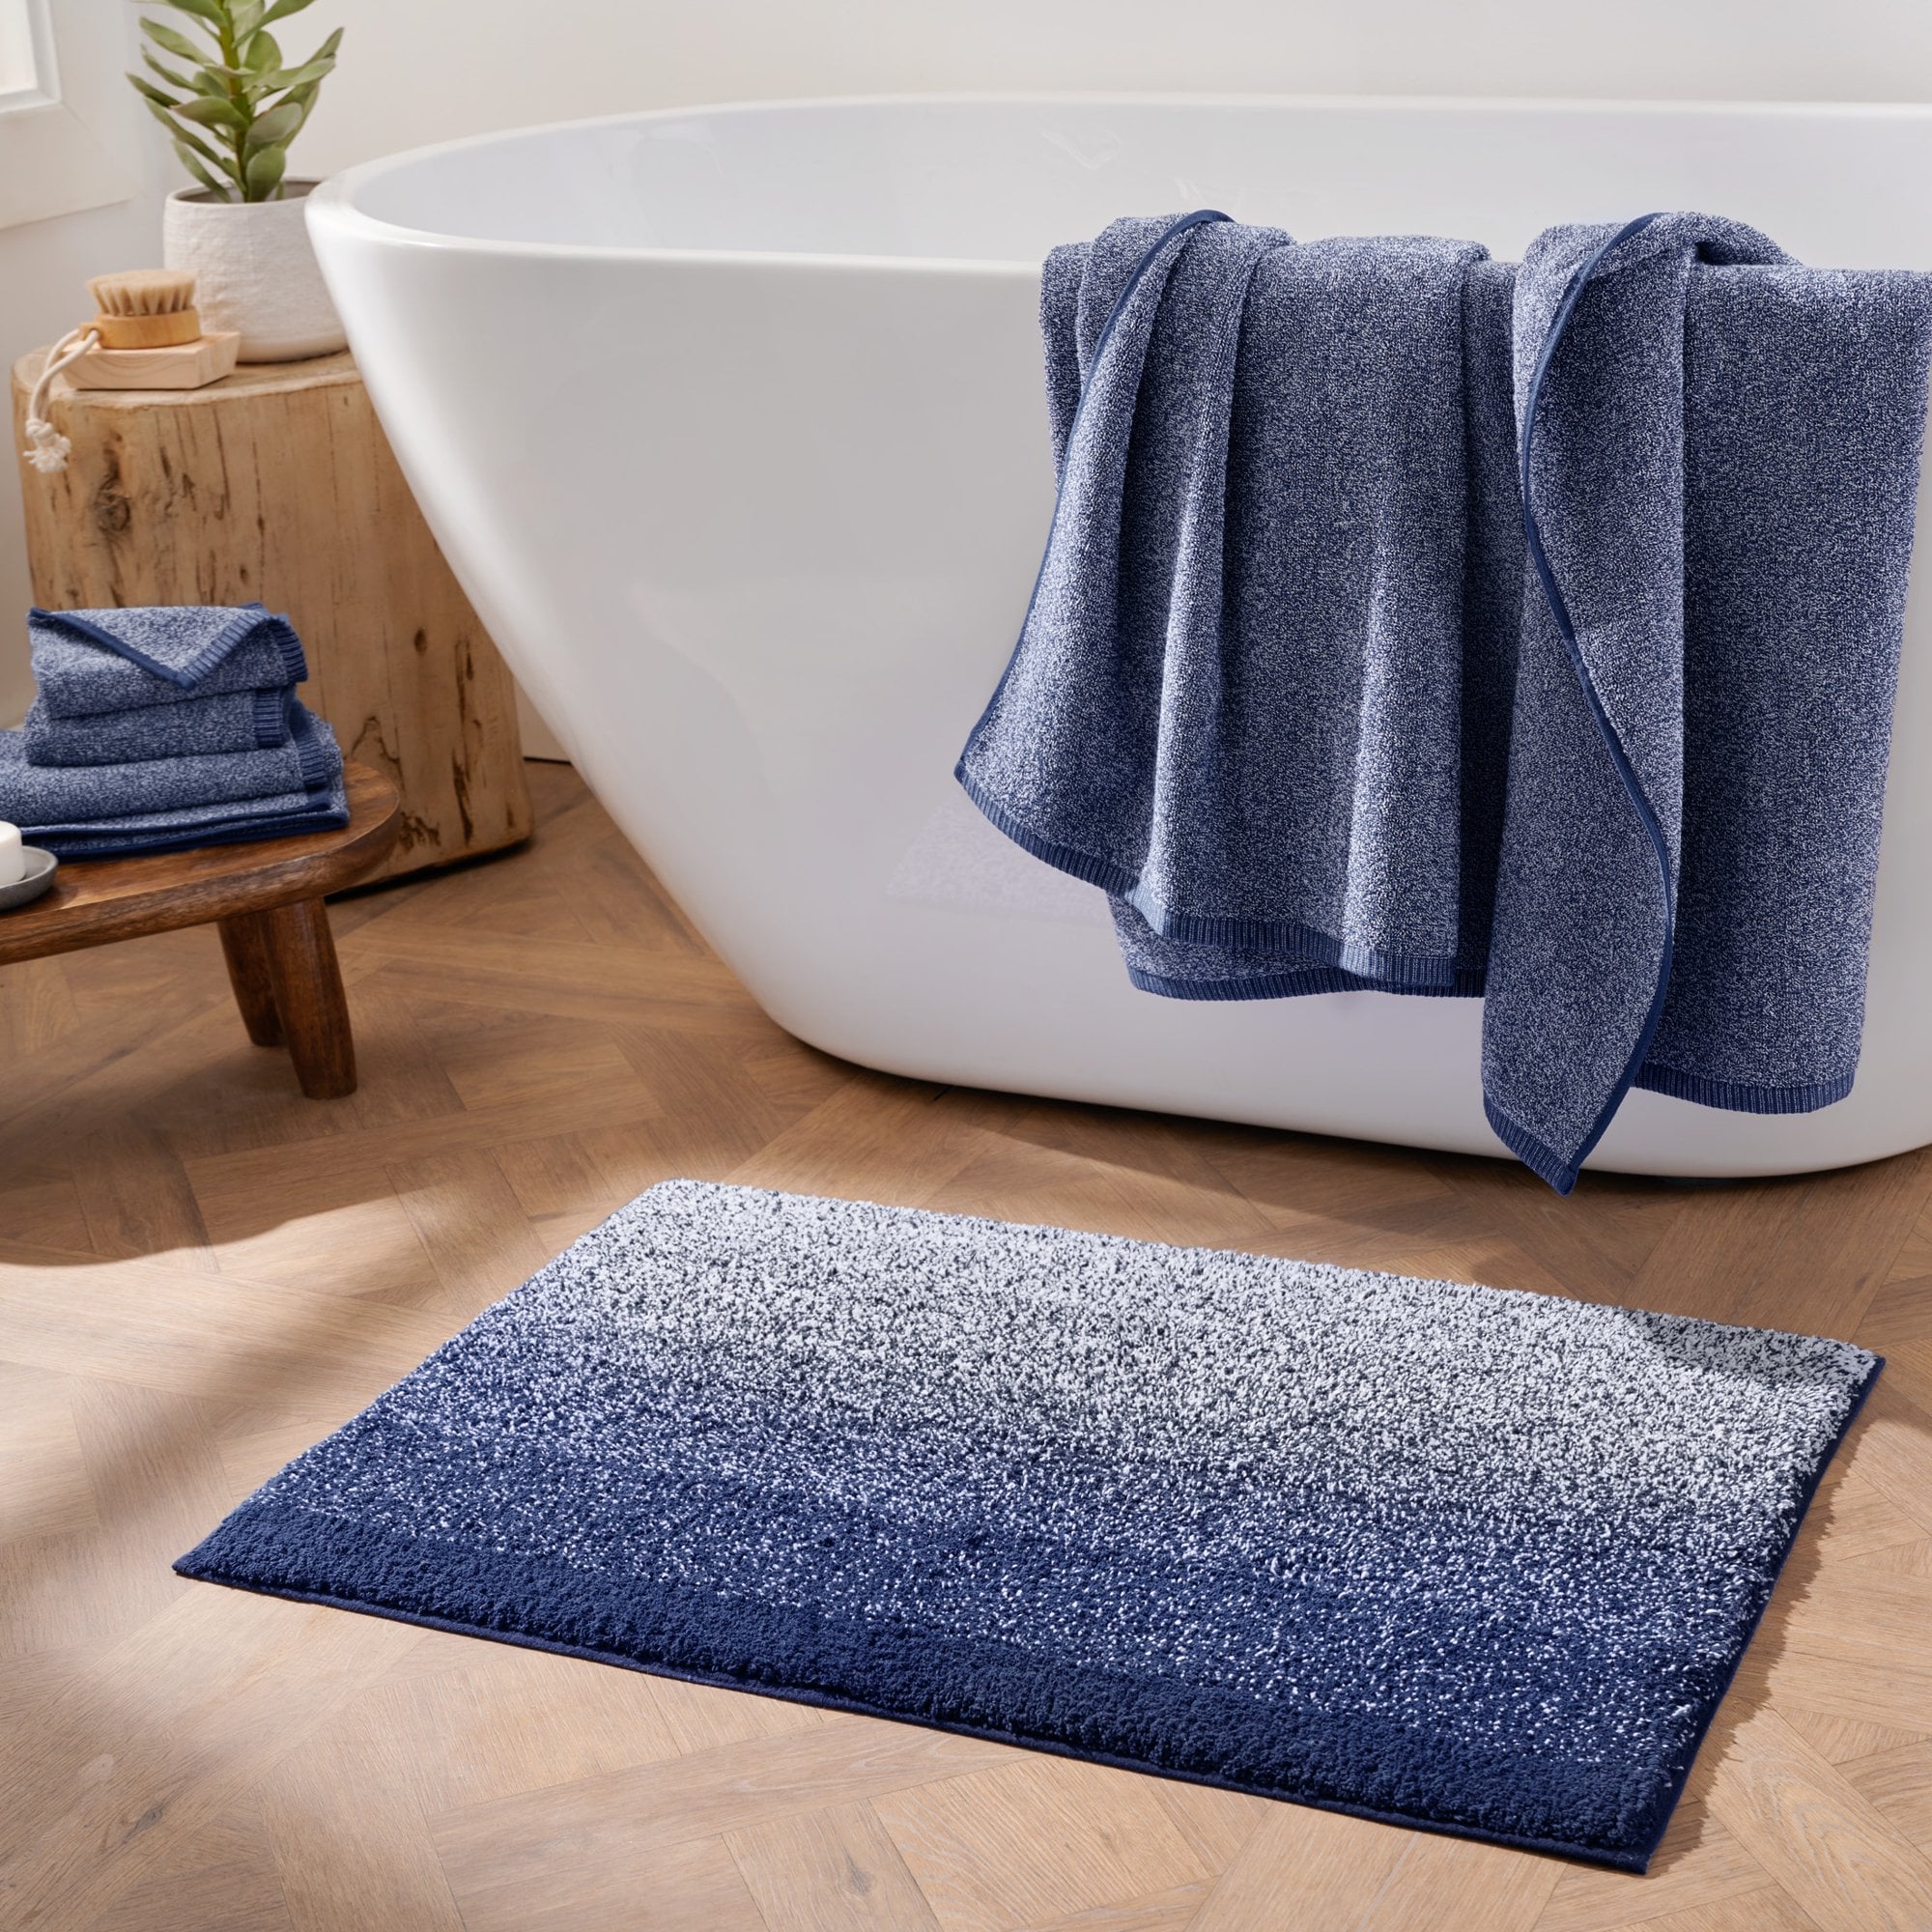 Gap Home Melange Ombre Non-Slip Cotton Bath Rug, For the First Time, Gap  Has Created a Home-Decor Line, Exclusively at Walmart